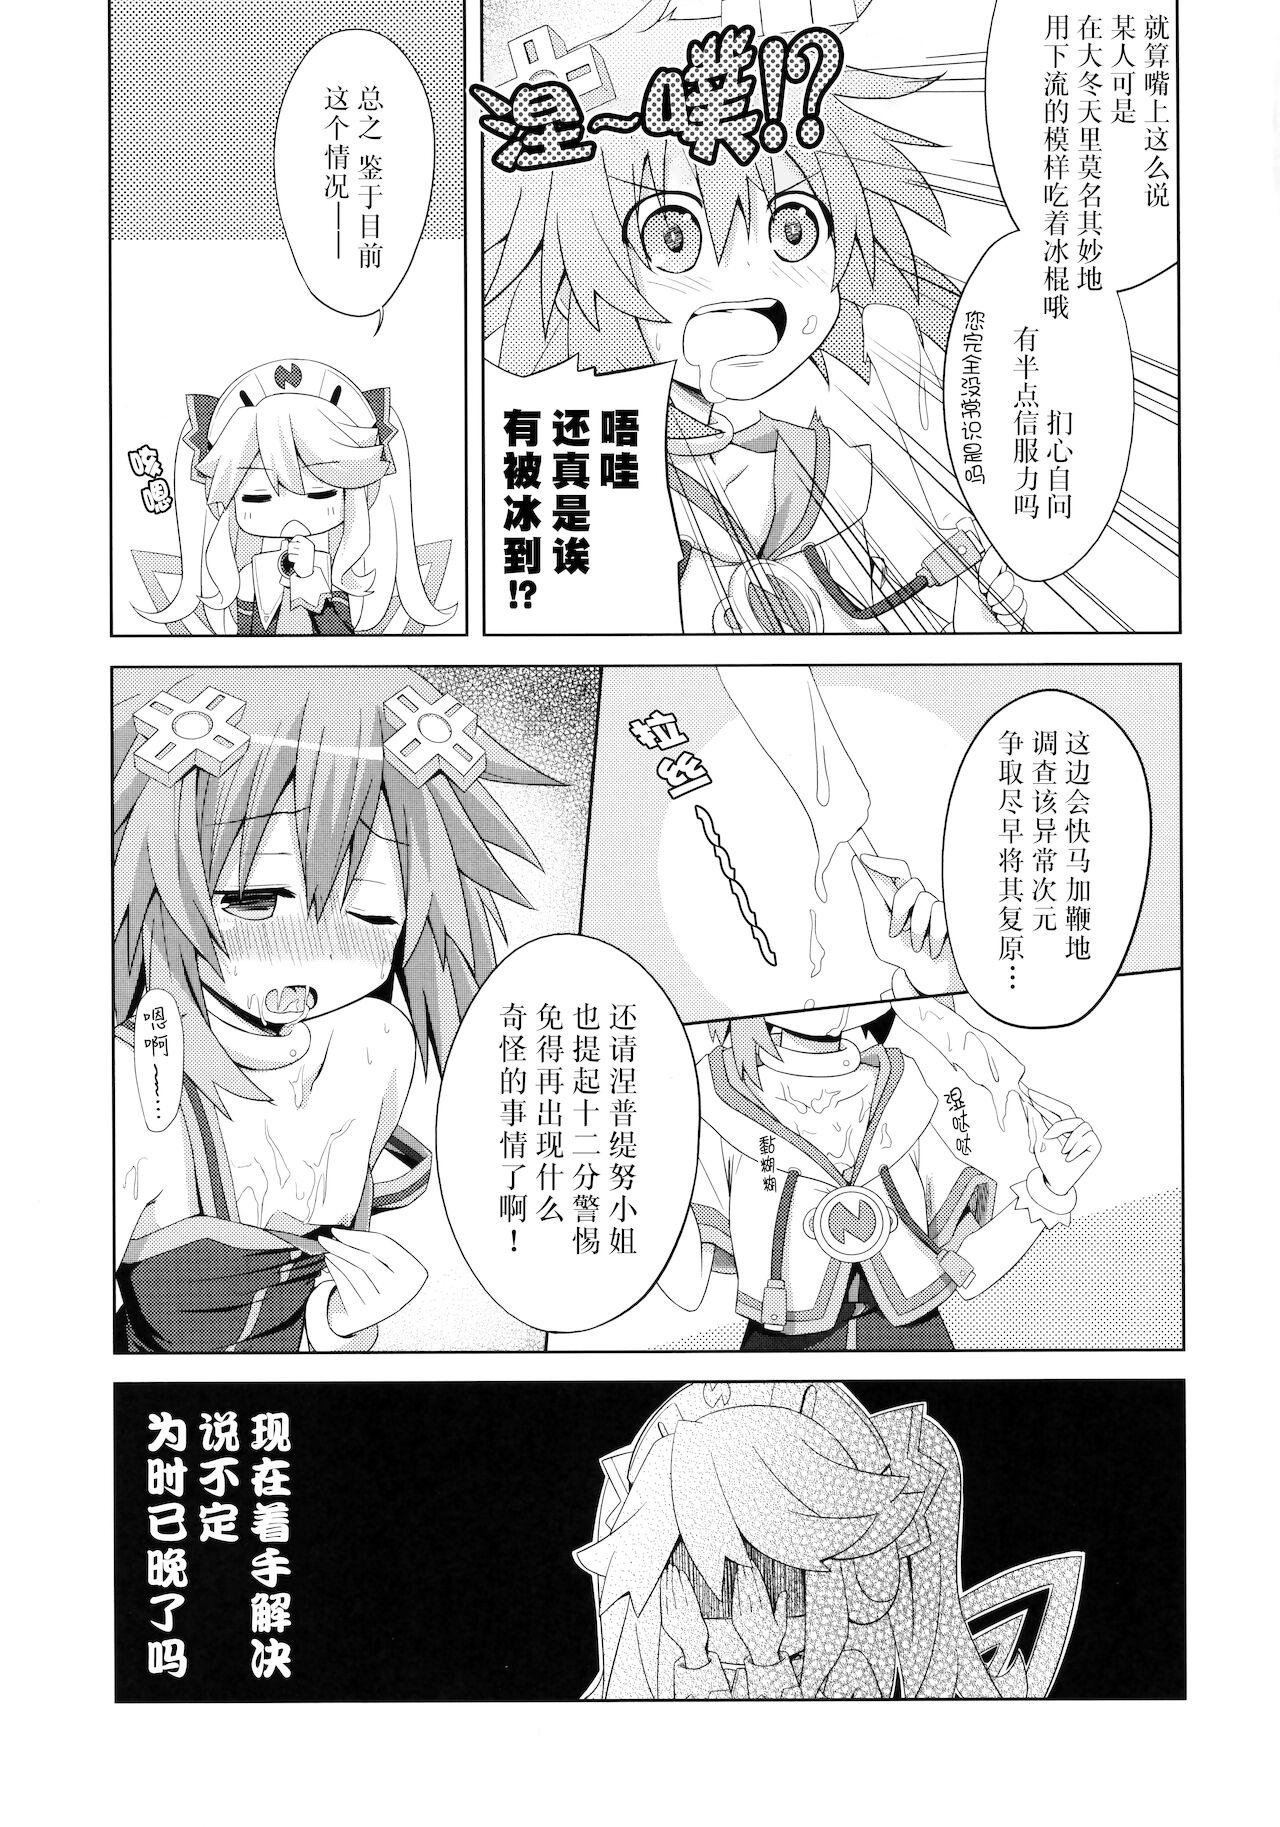 Pussy Orgasm A certain Nepgear was harmed in the making of this doujinshi - Hyperdimension neptunia | choujigen game neptune Livecam - Page 6